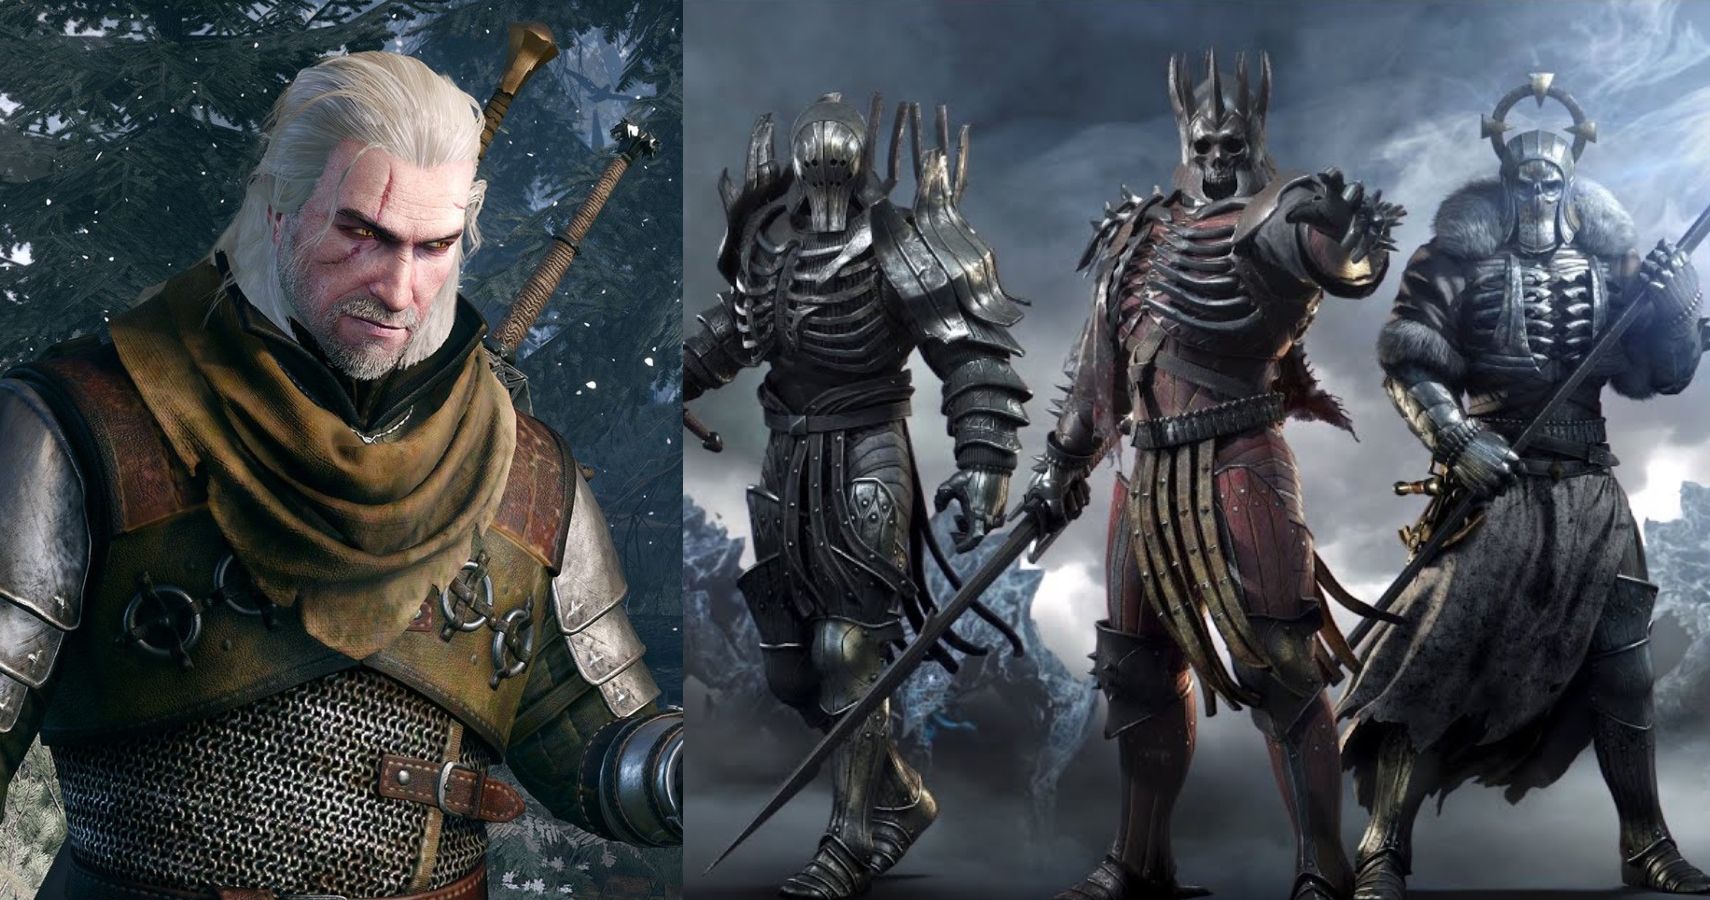 The Witcher 3 A Guide To All 4 Major Boss Fights The 6 Hardest Battles In The Game